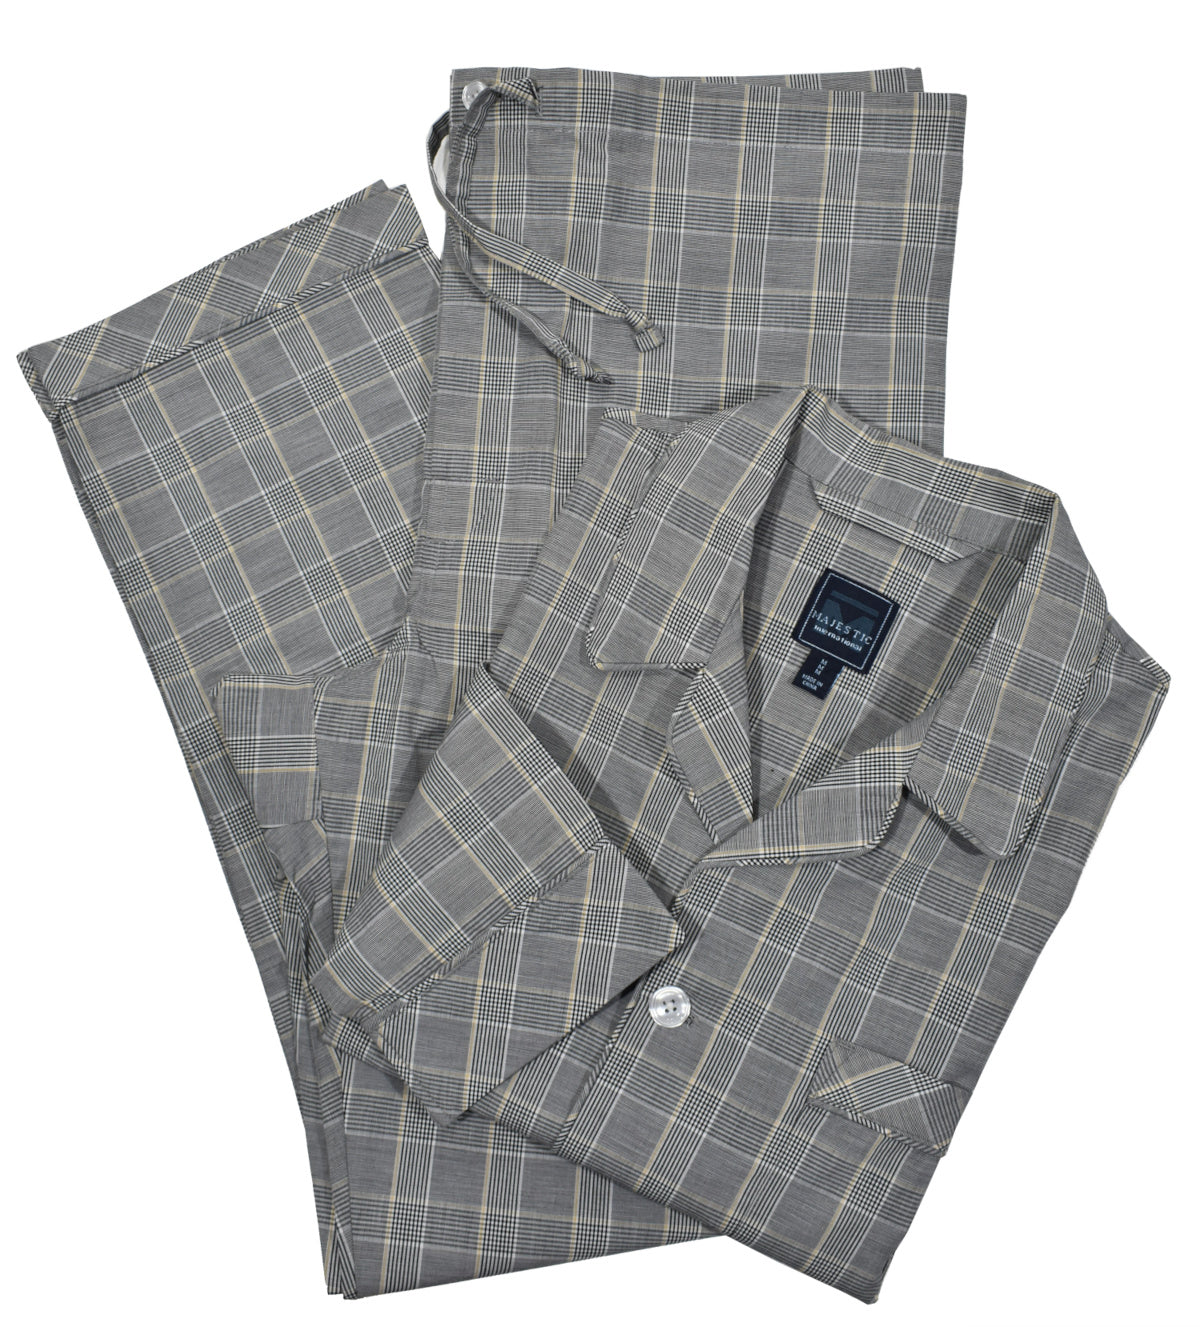 Be comfortable and timelessly elegant with the ZM1906 Glen Plaid Pajama. Its classic plaid pattern and rich colors are crafted in soft cotton fabric for a chic yet cozy nightwear look. The button front top and drawstring pant with a stretch waistband and functional fly make this classic fit pajama the perfect addition to your loungewear collection. 